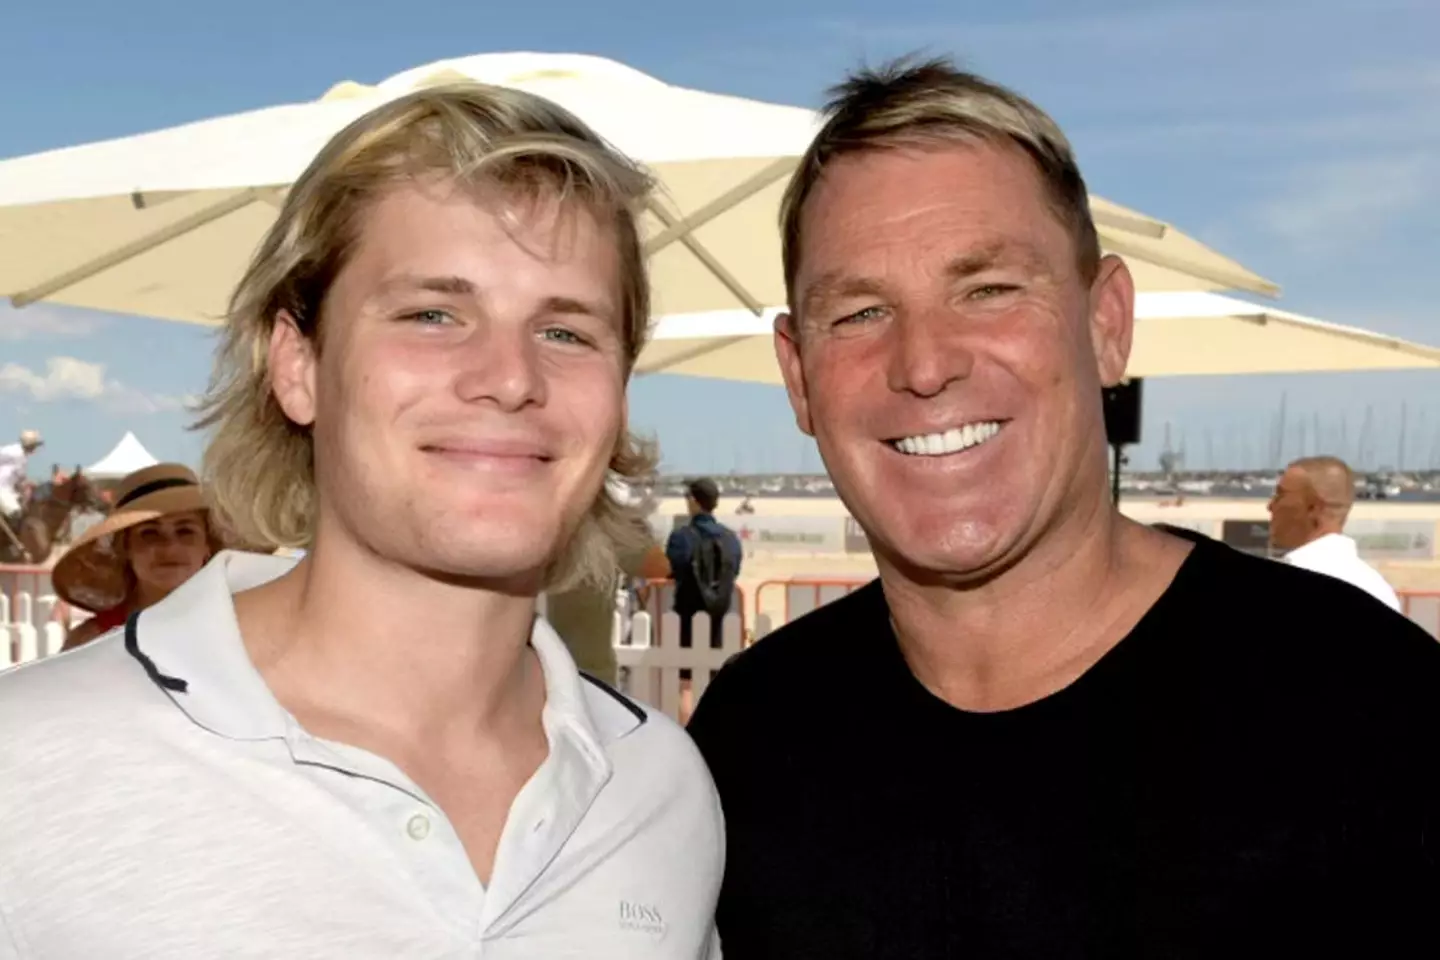 Shane Warne (right) with his son Jackson (Image: Getty)